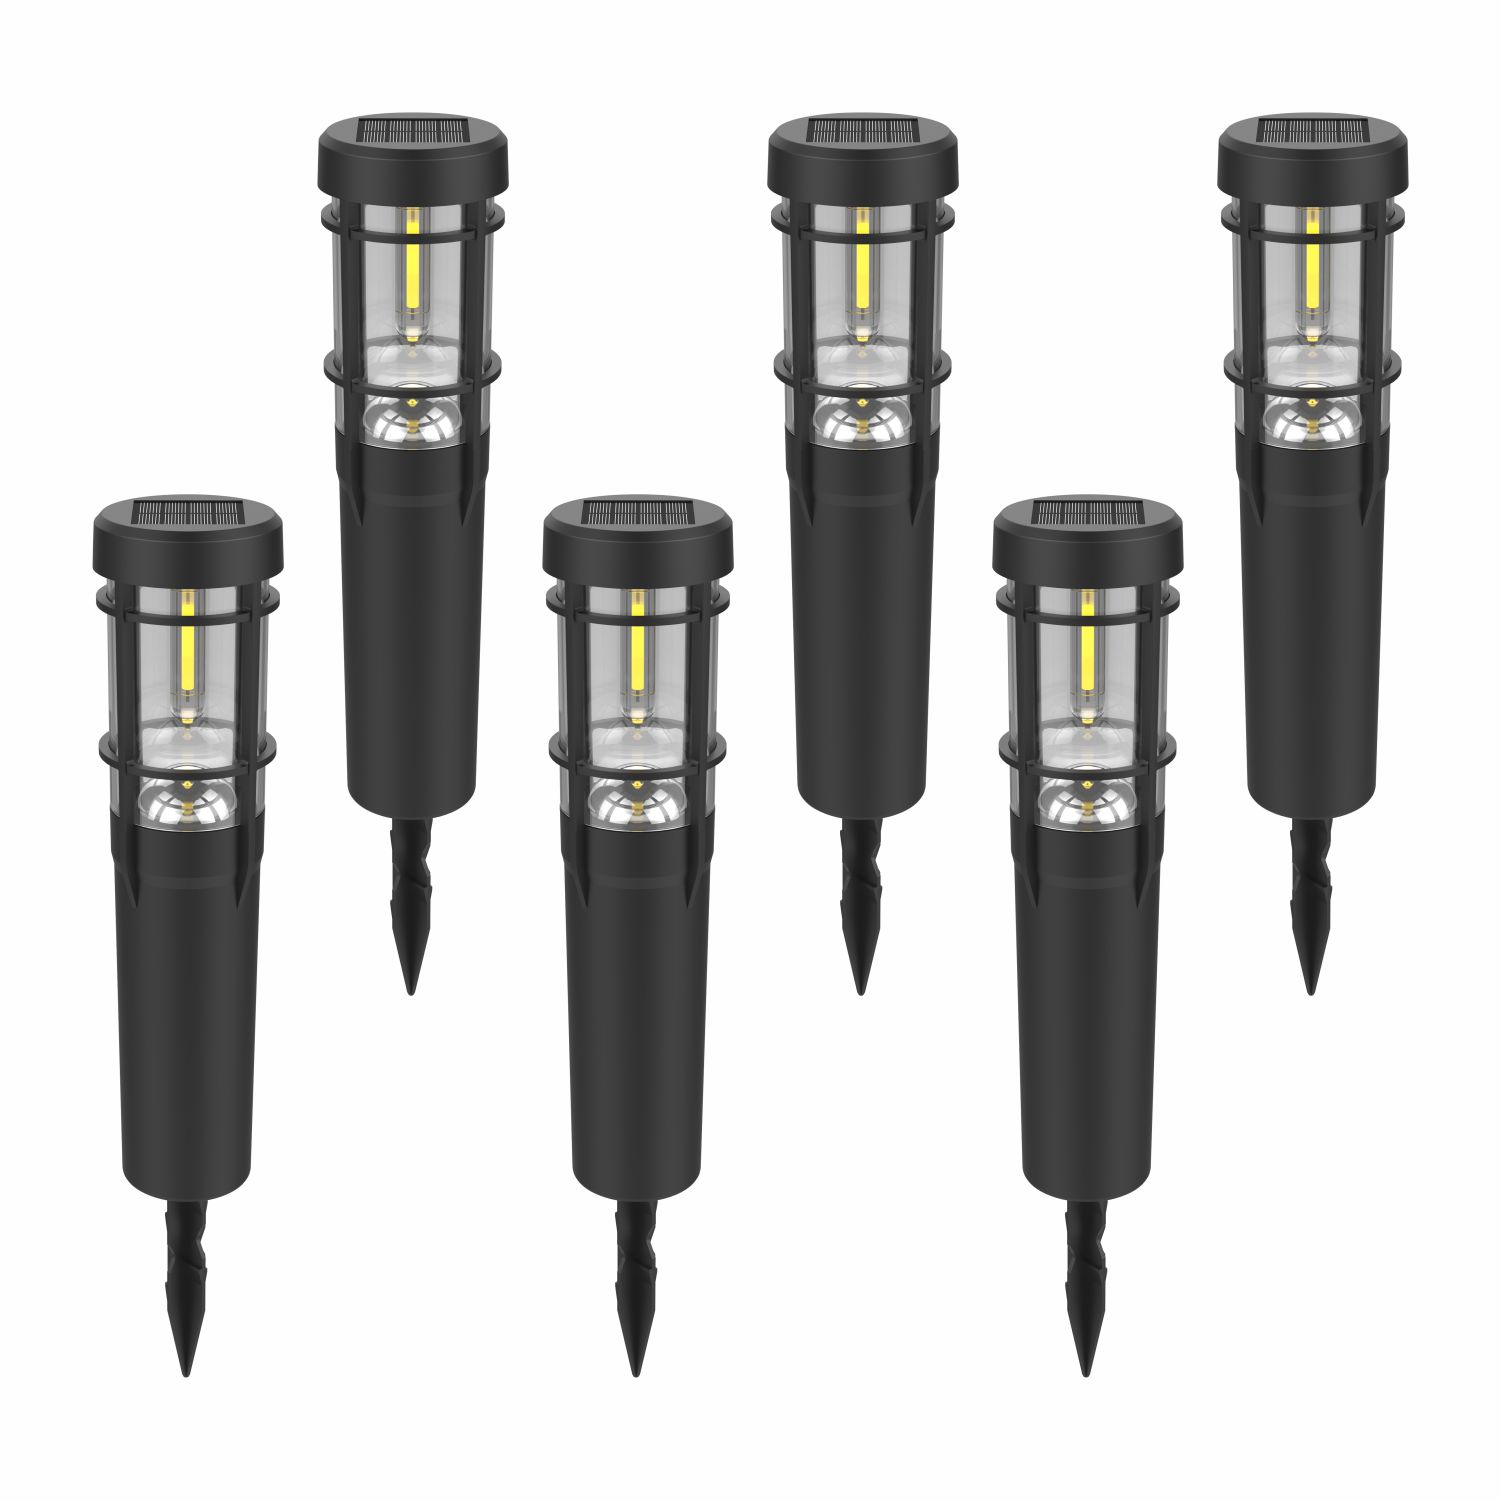 HHS231B New Arrivals  LED Solar Garden Lights Outdoor Rechargeable Garden Lights  Waterproof  With Remote Control